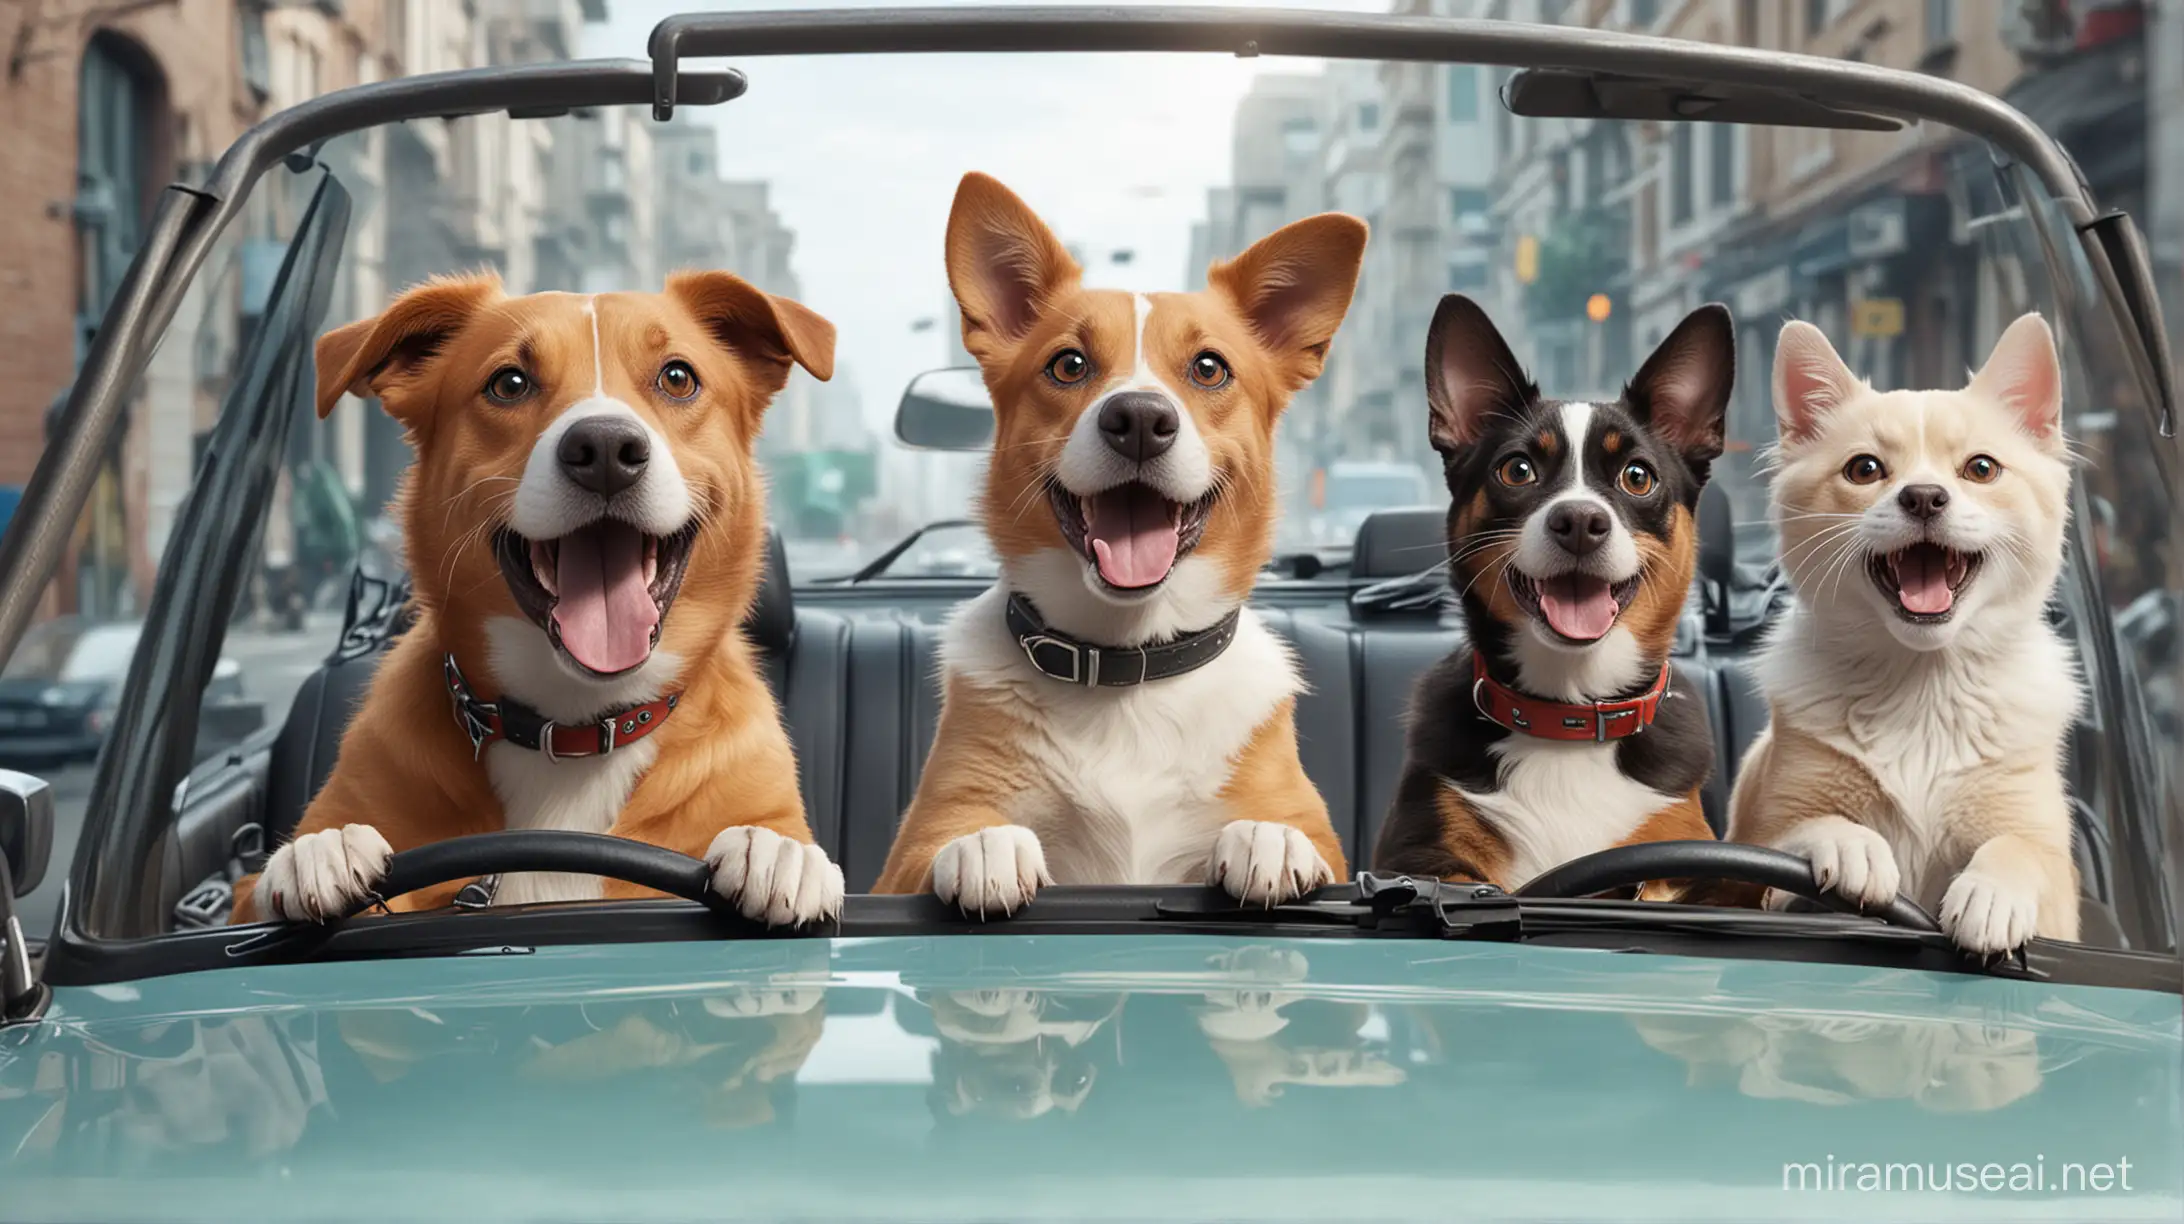 Cats and Dogs Driving Cars Hilarious and Lifelike Animal Adventure